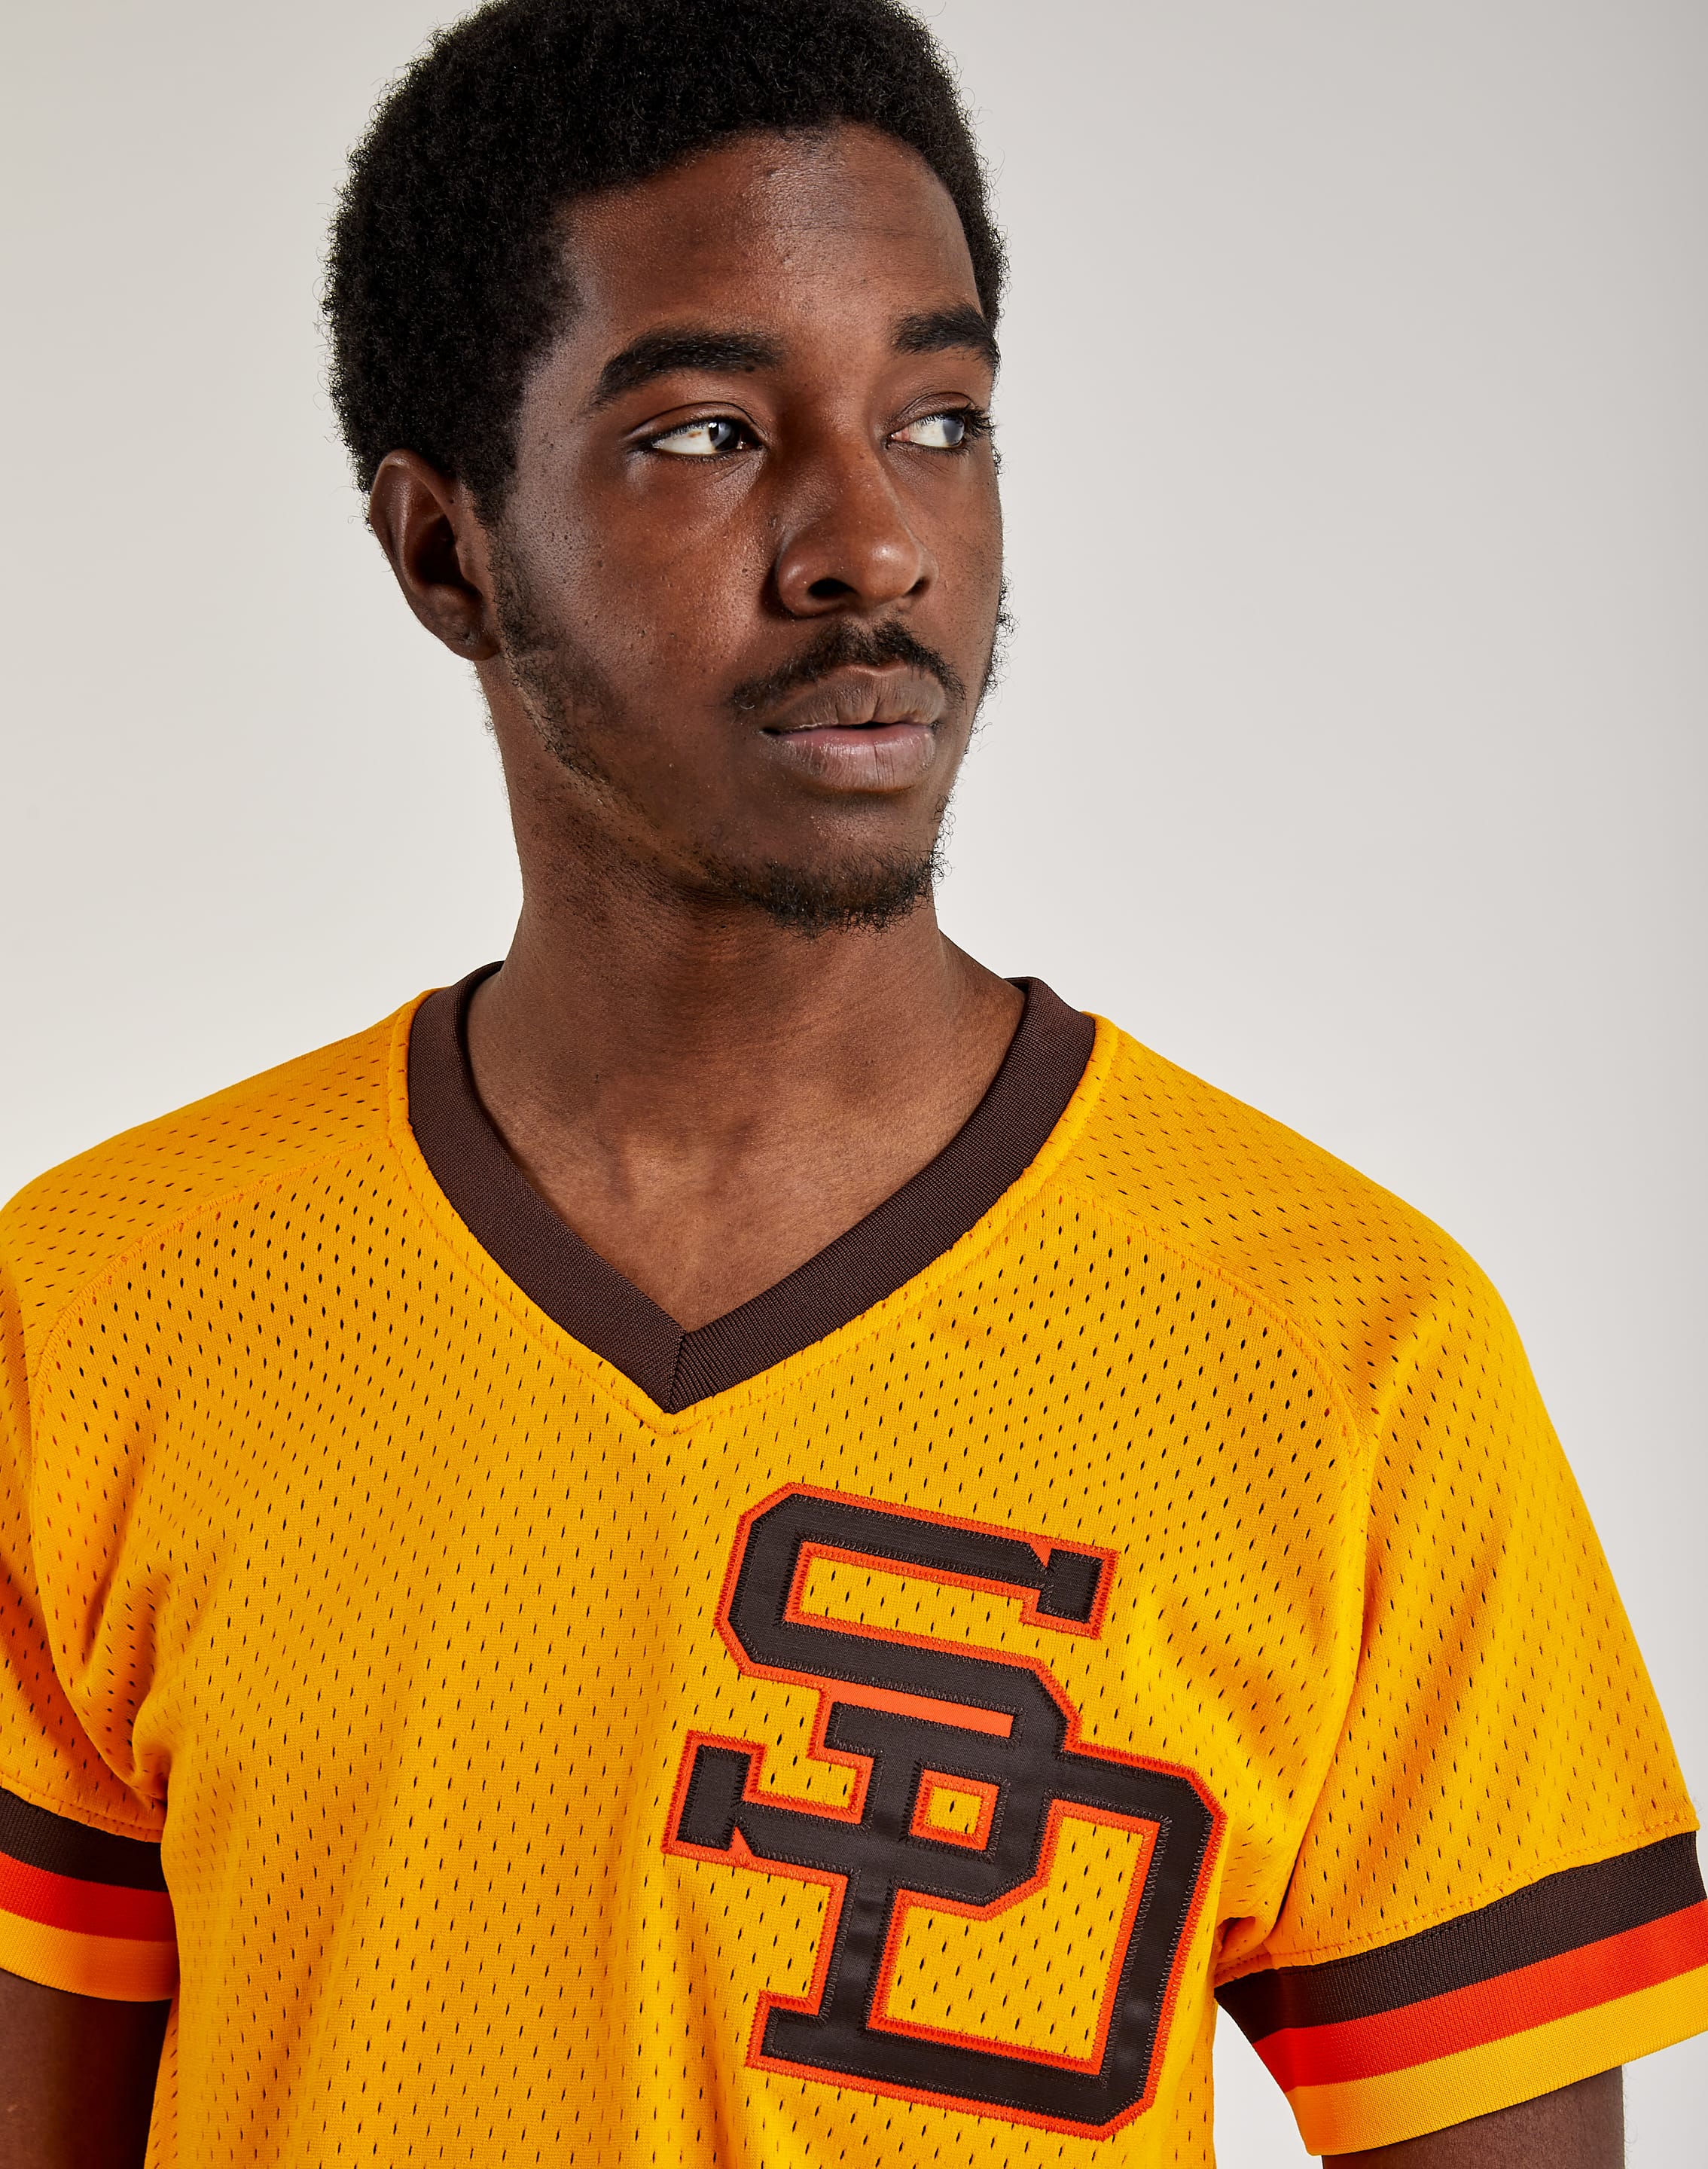 dave winfield padres jersey